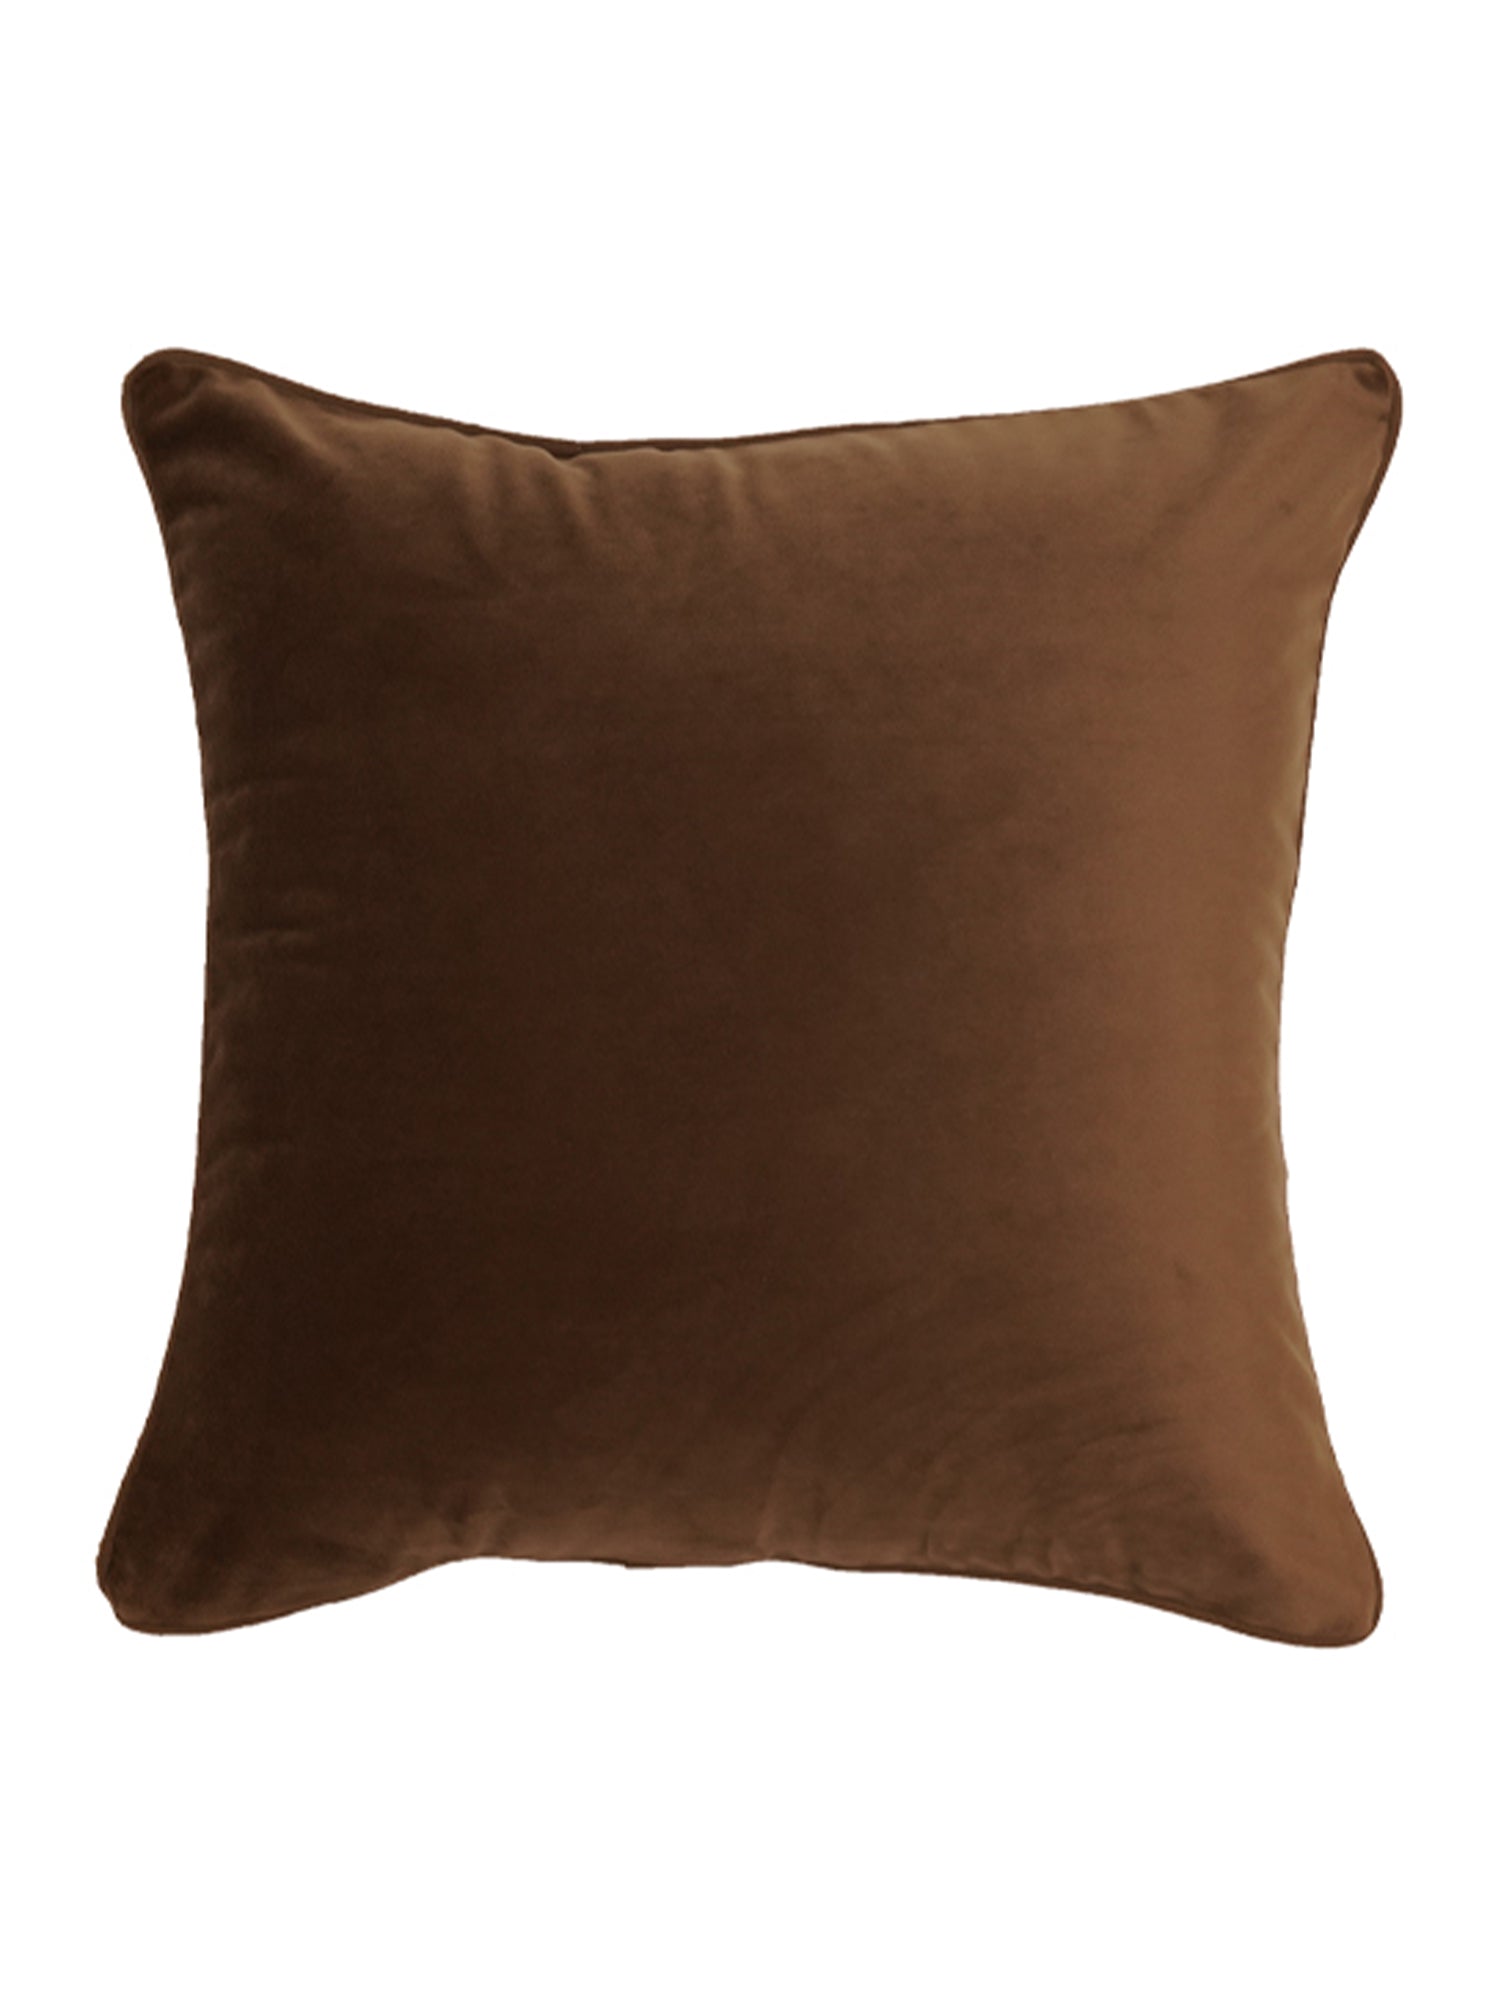 Cushion Cover Solid Velvet Brown - 16"X16"